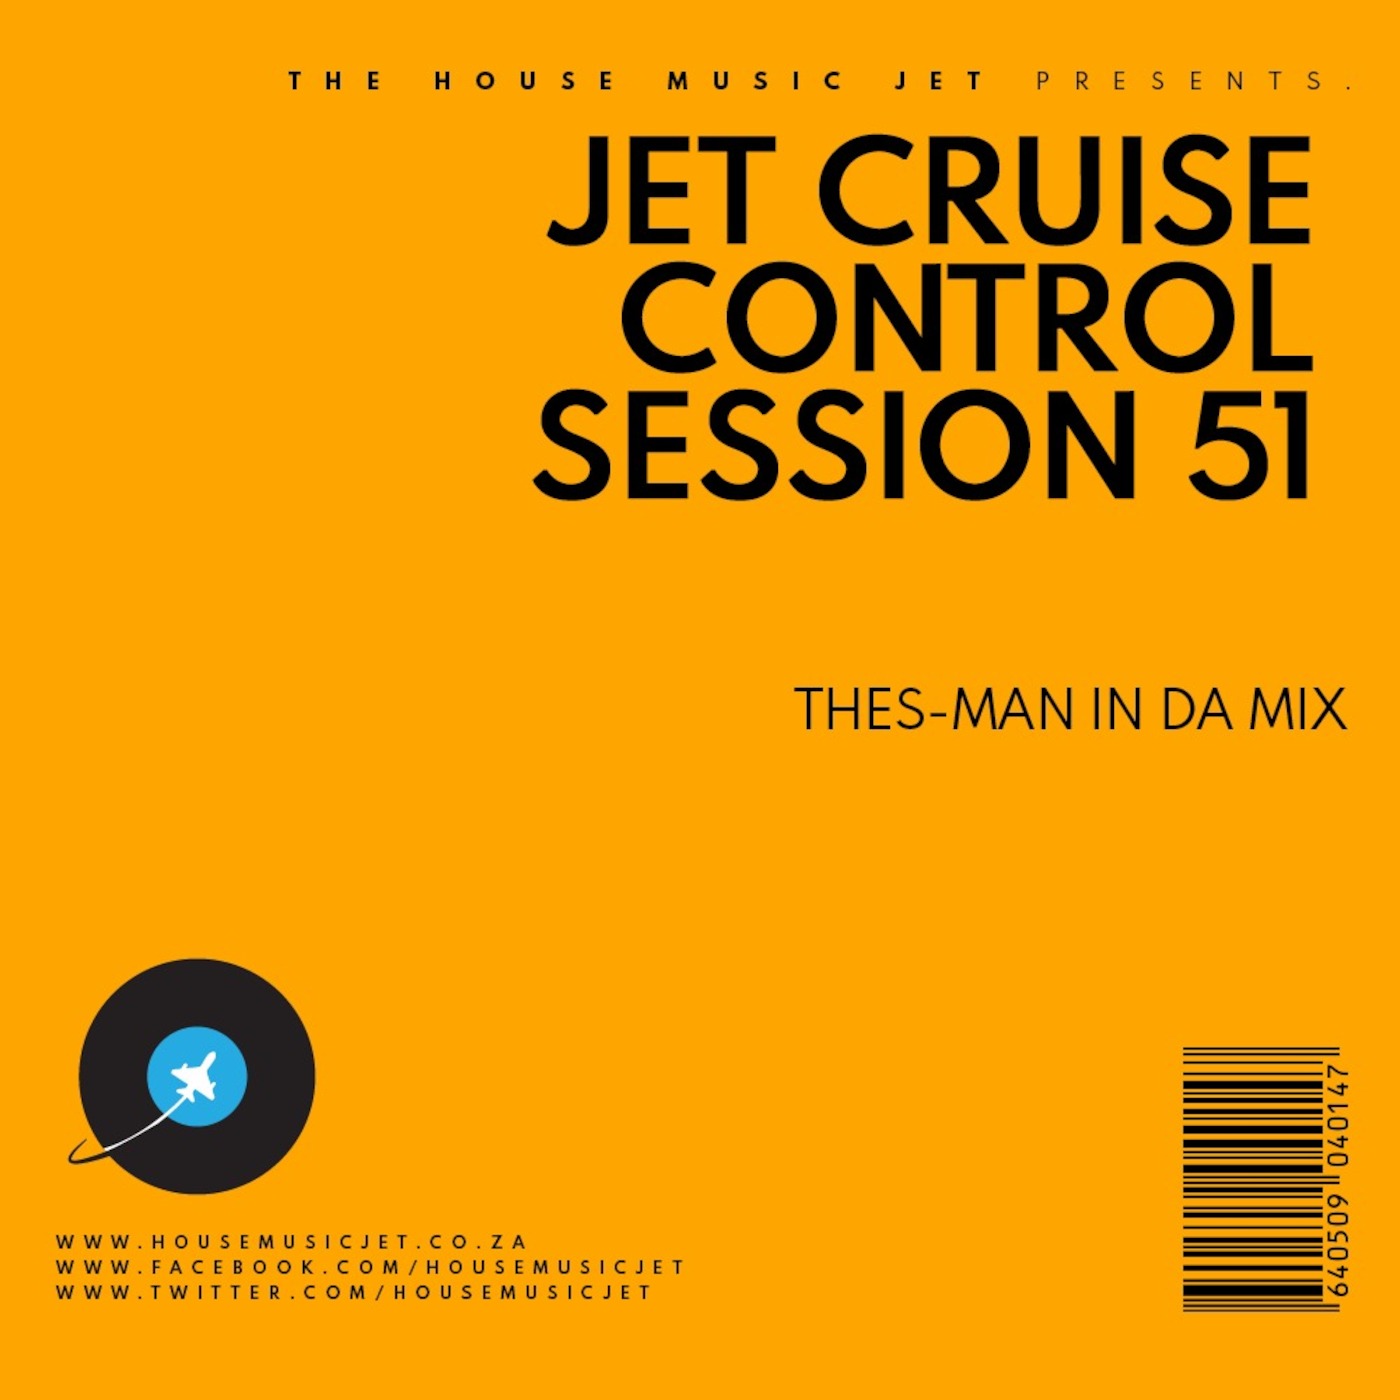 Thes-Man In Da Mix – Jet Cruise Control Session 51